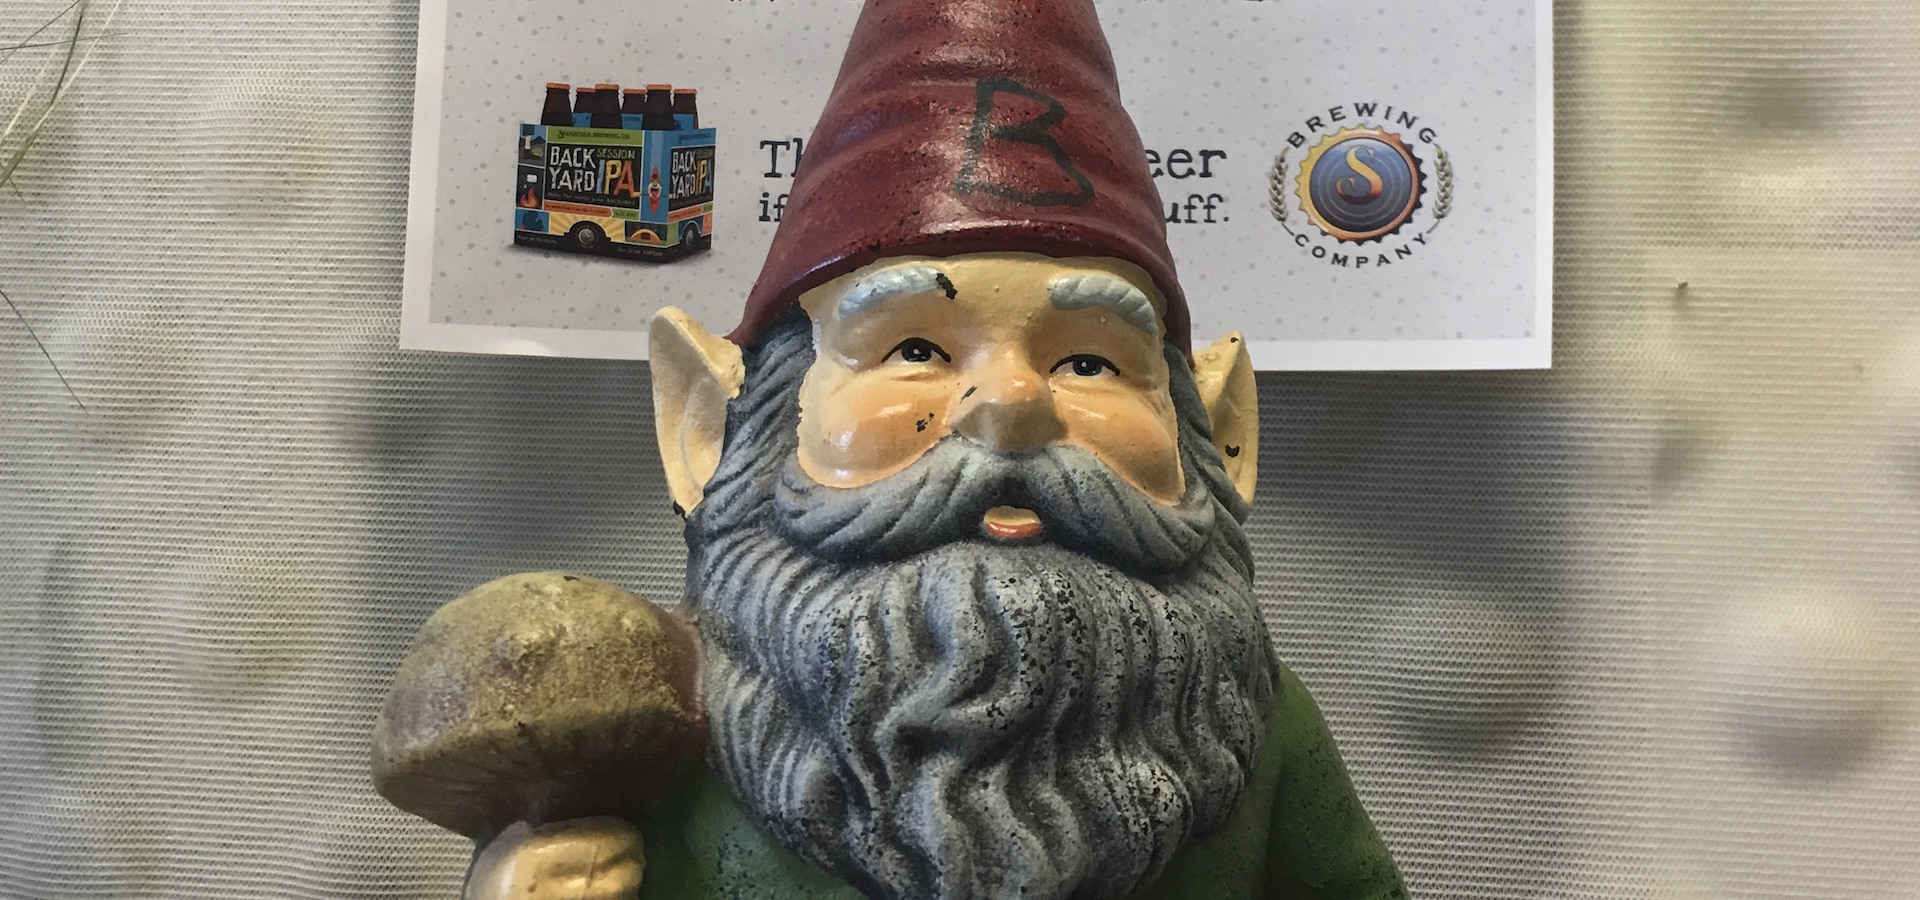 Bumblewink gnome at the Revel office